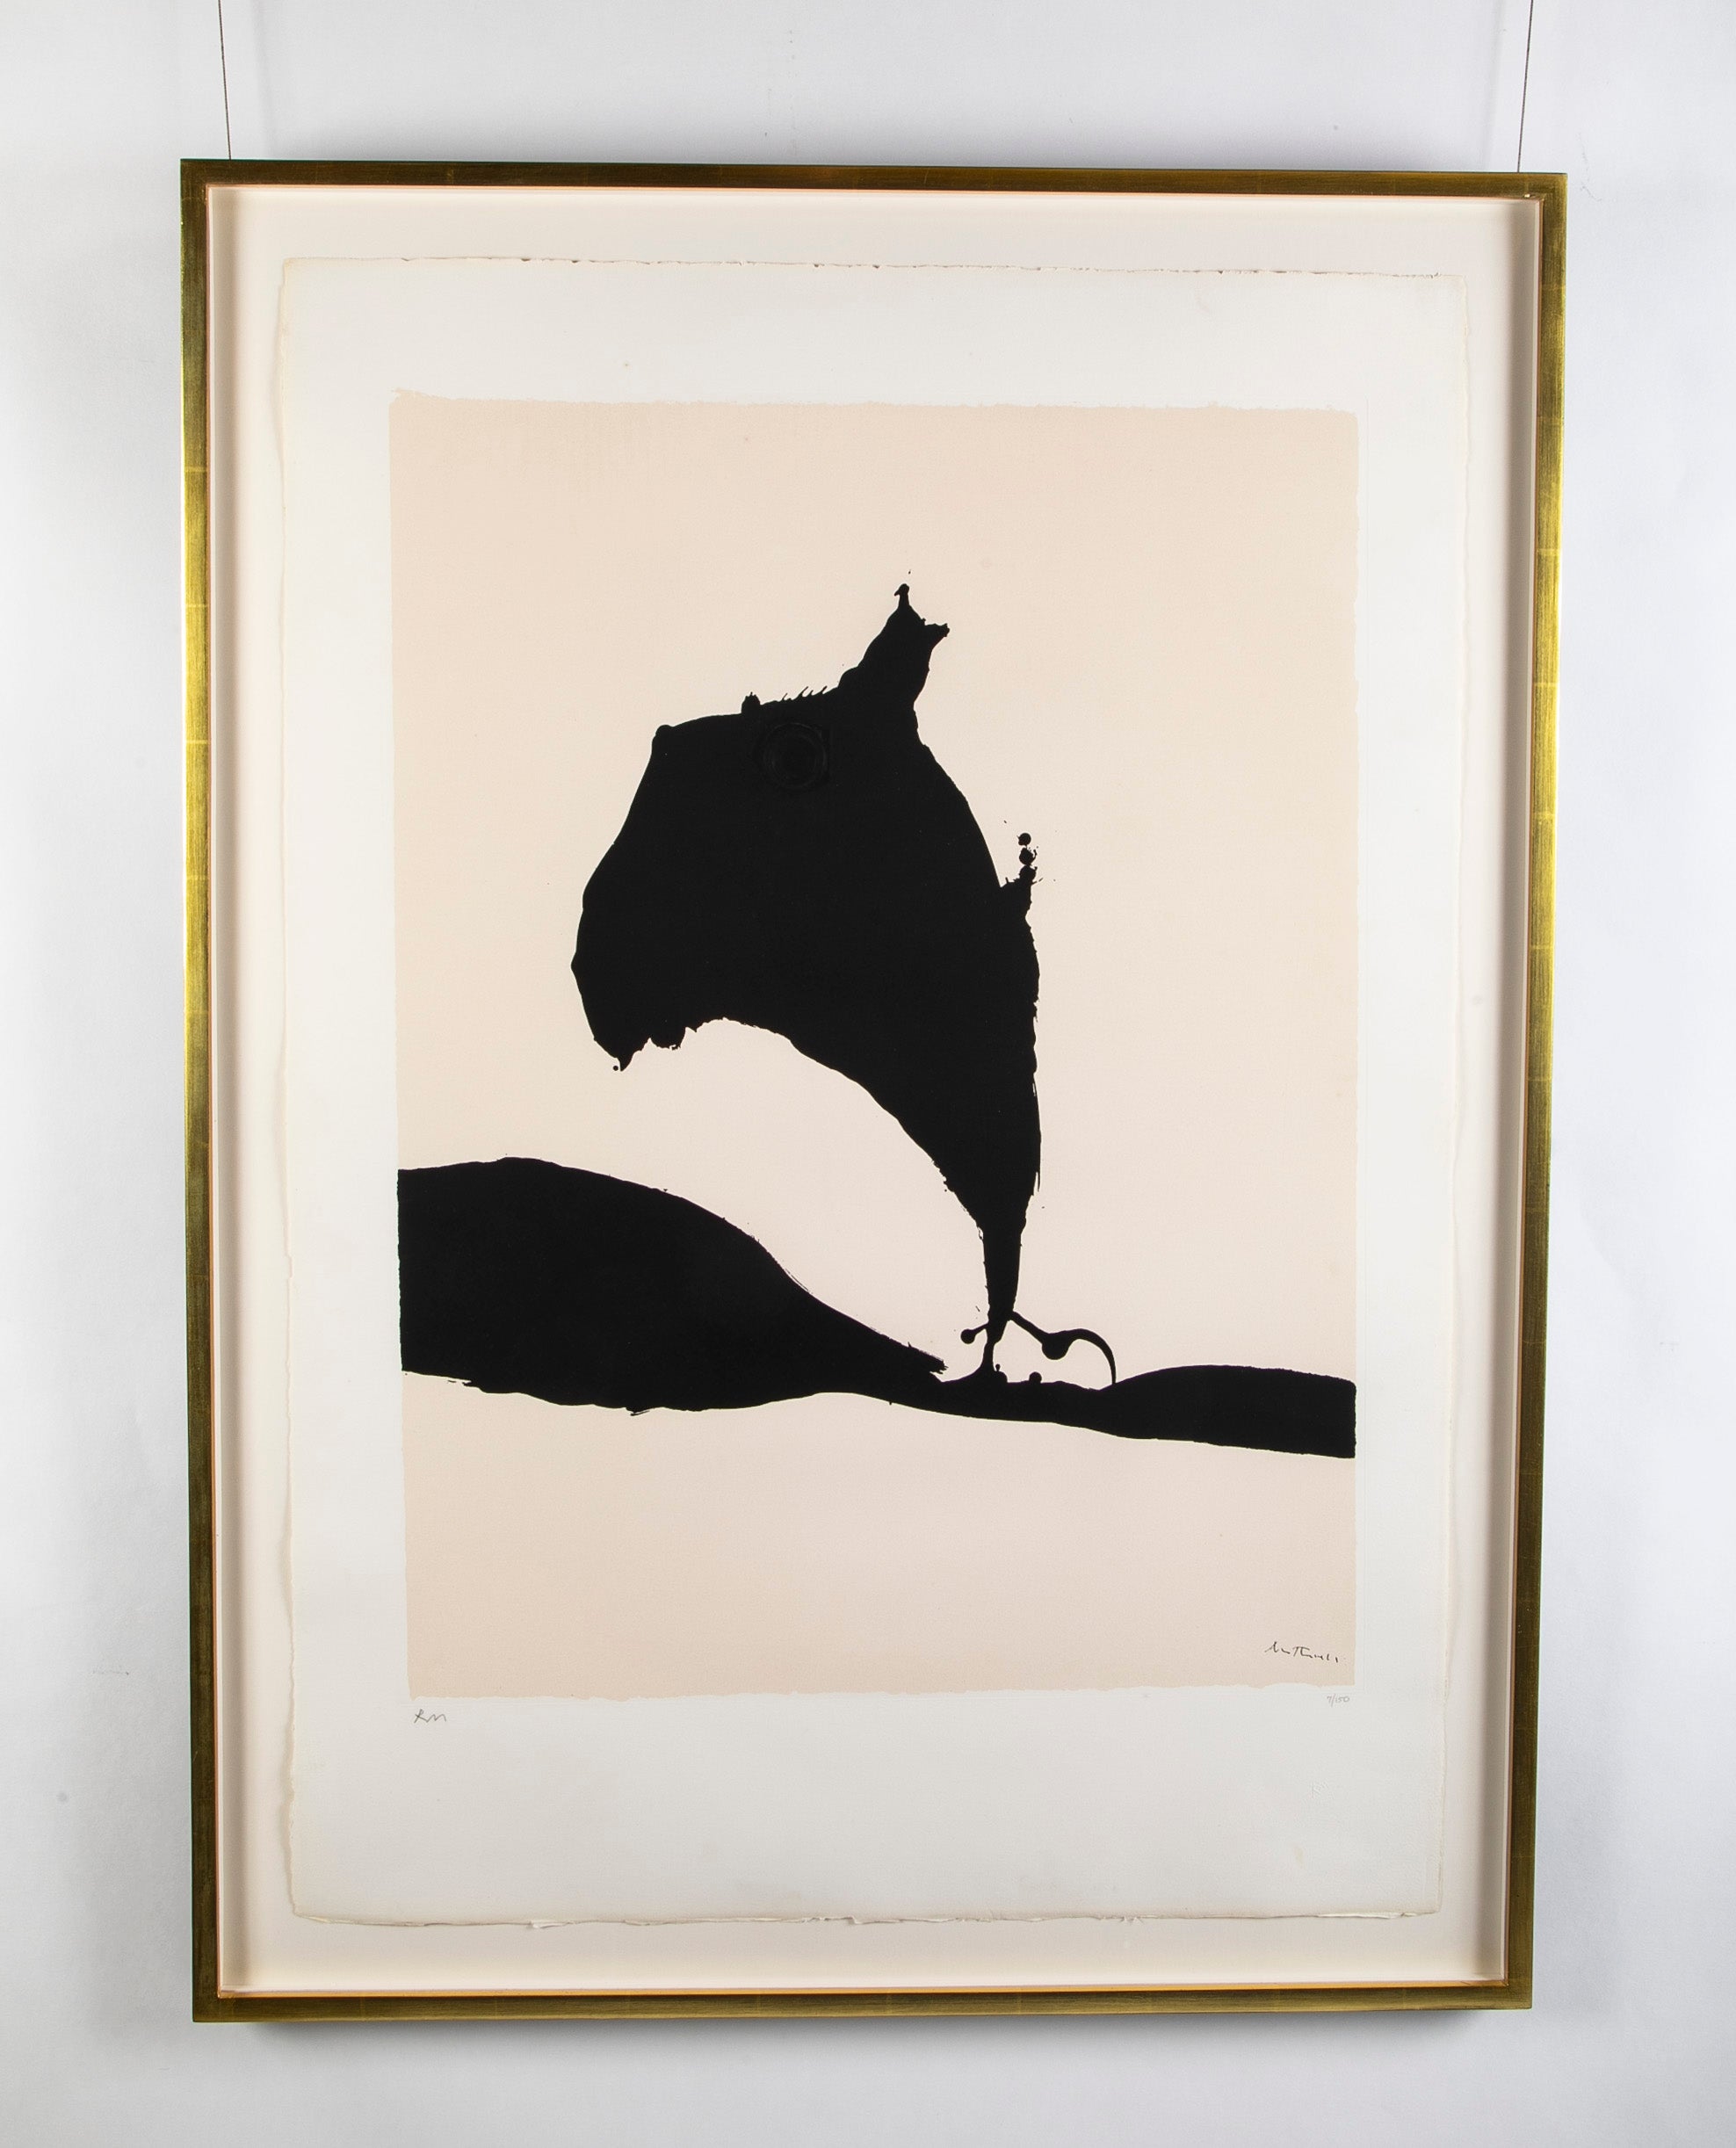 "Africa Suite 9" by Robert Motherwell